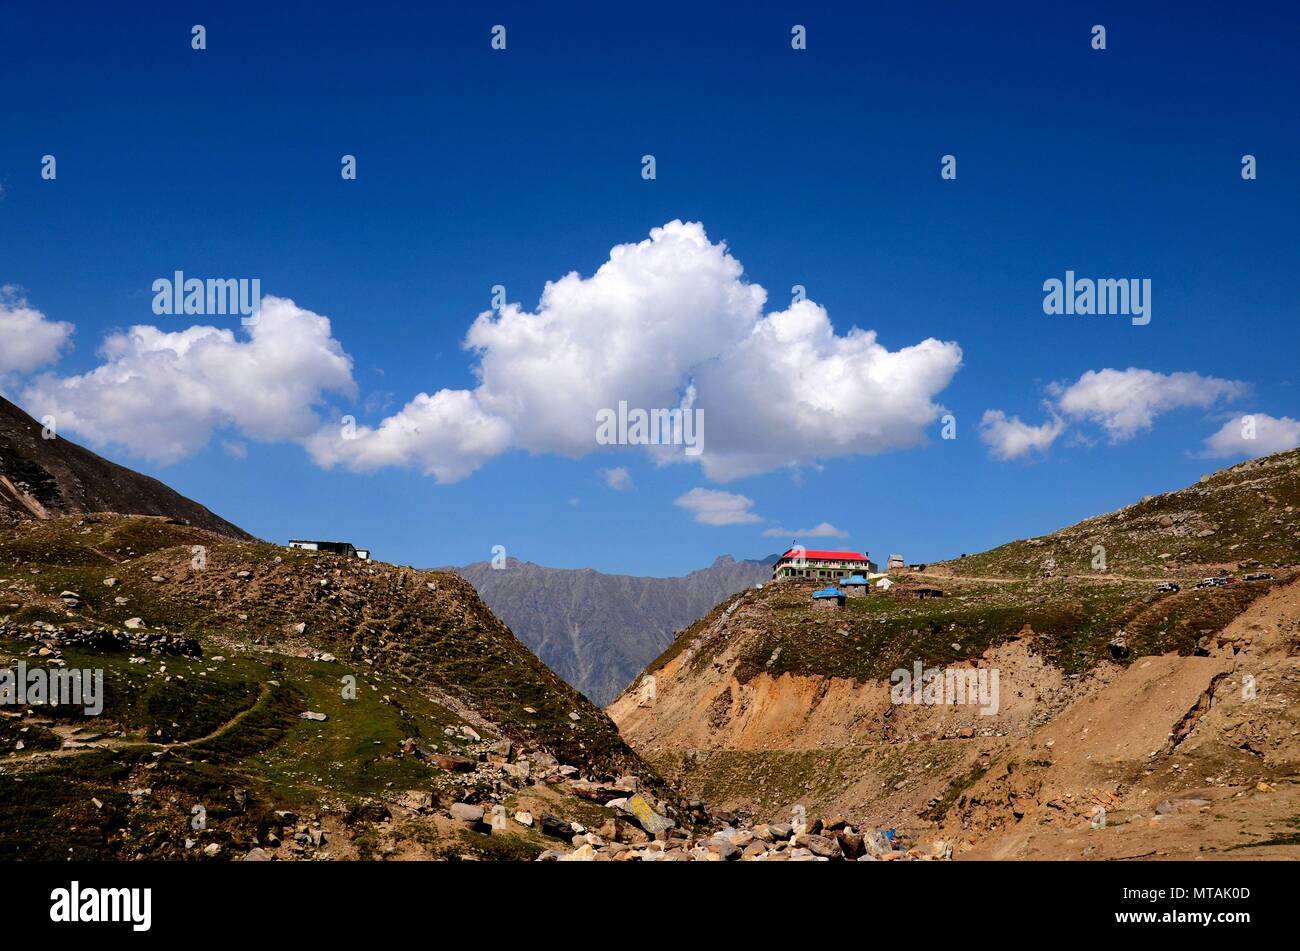 Rest house with red roof on mountain top at Lake Saiful Muluk Kaghan Valley Pakistan Stock Photo